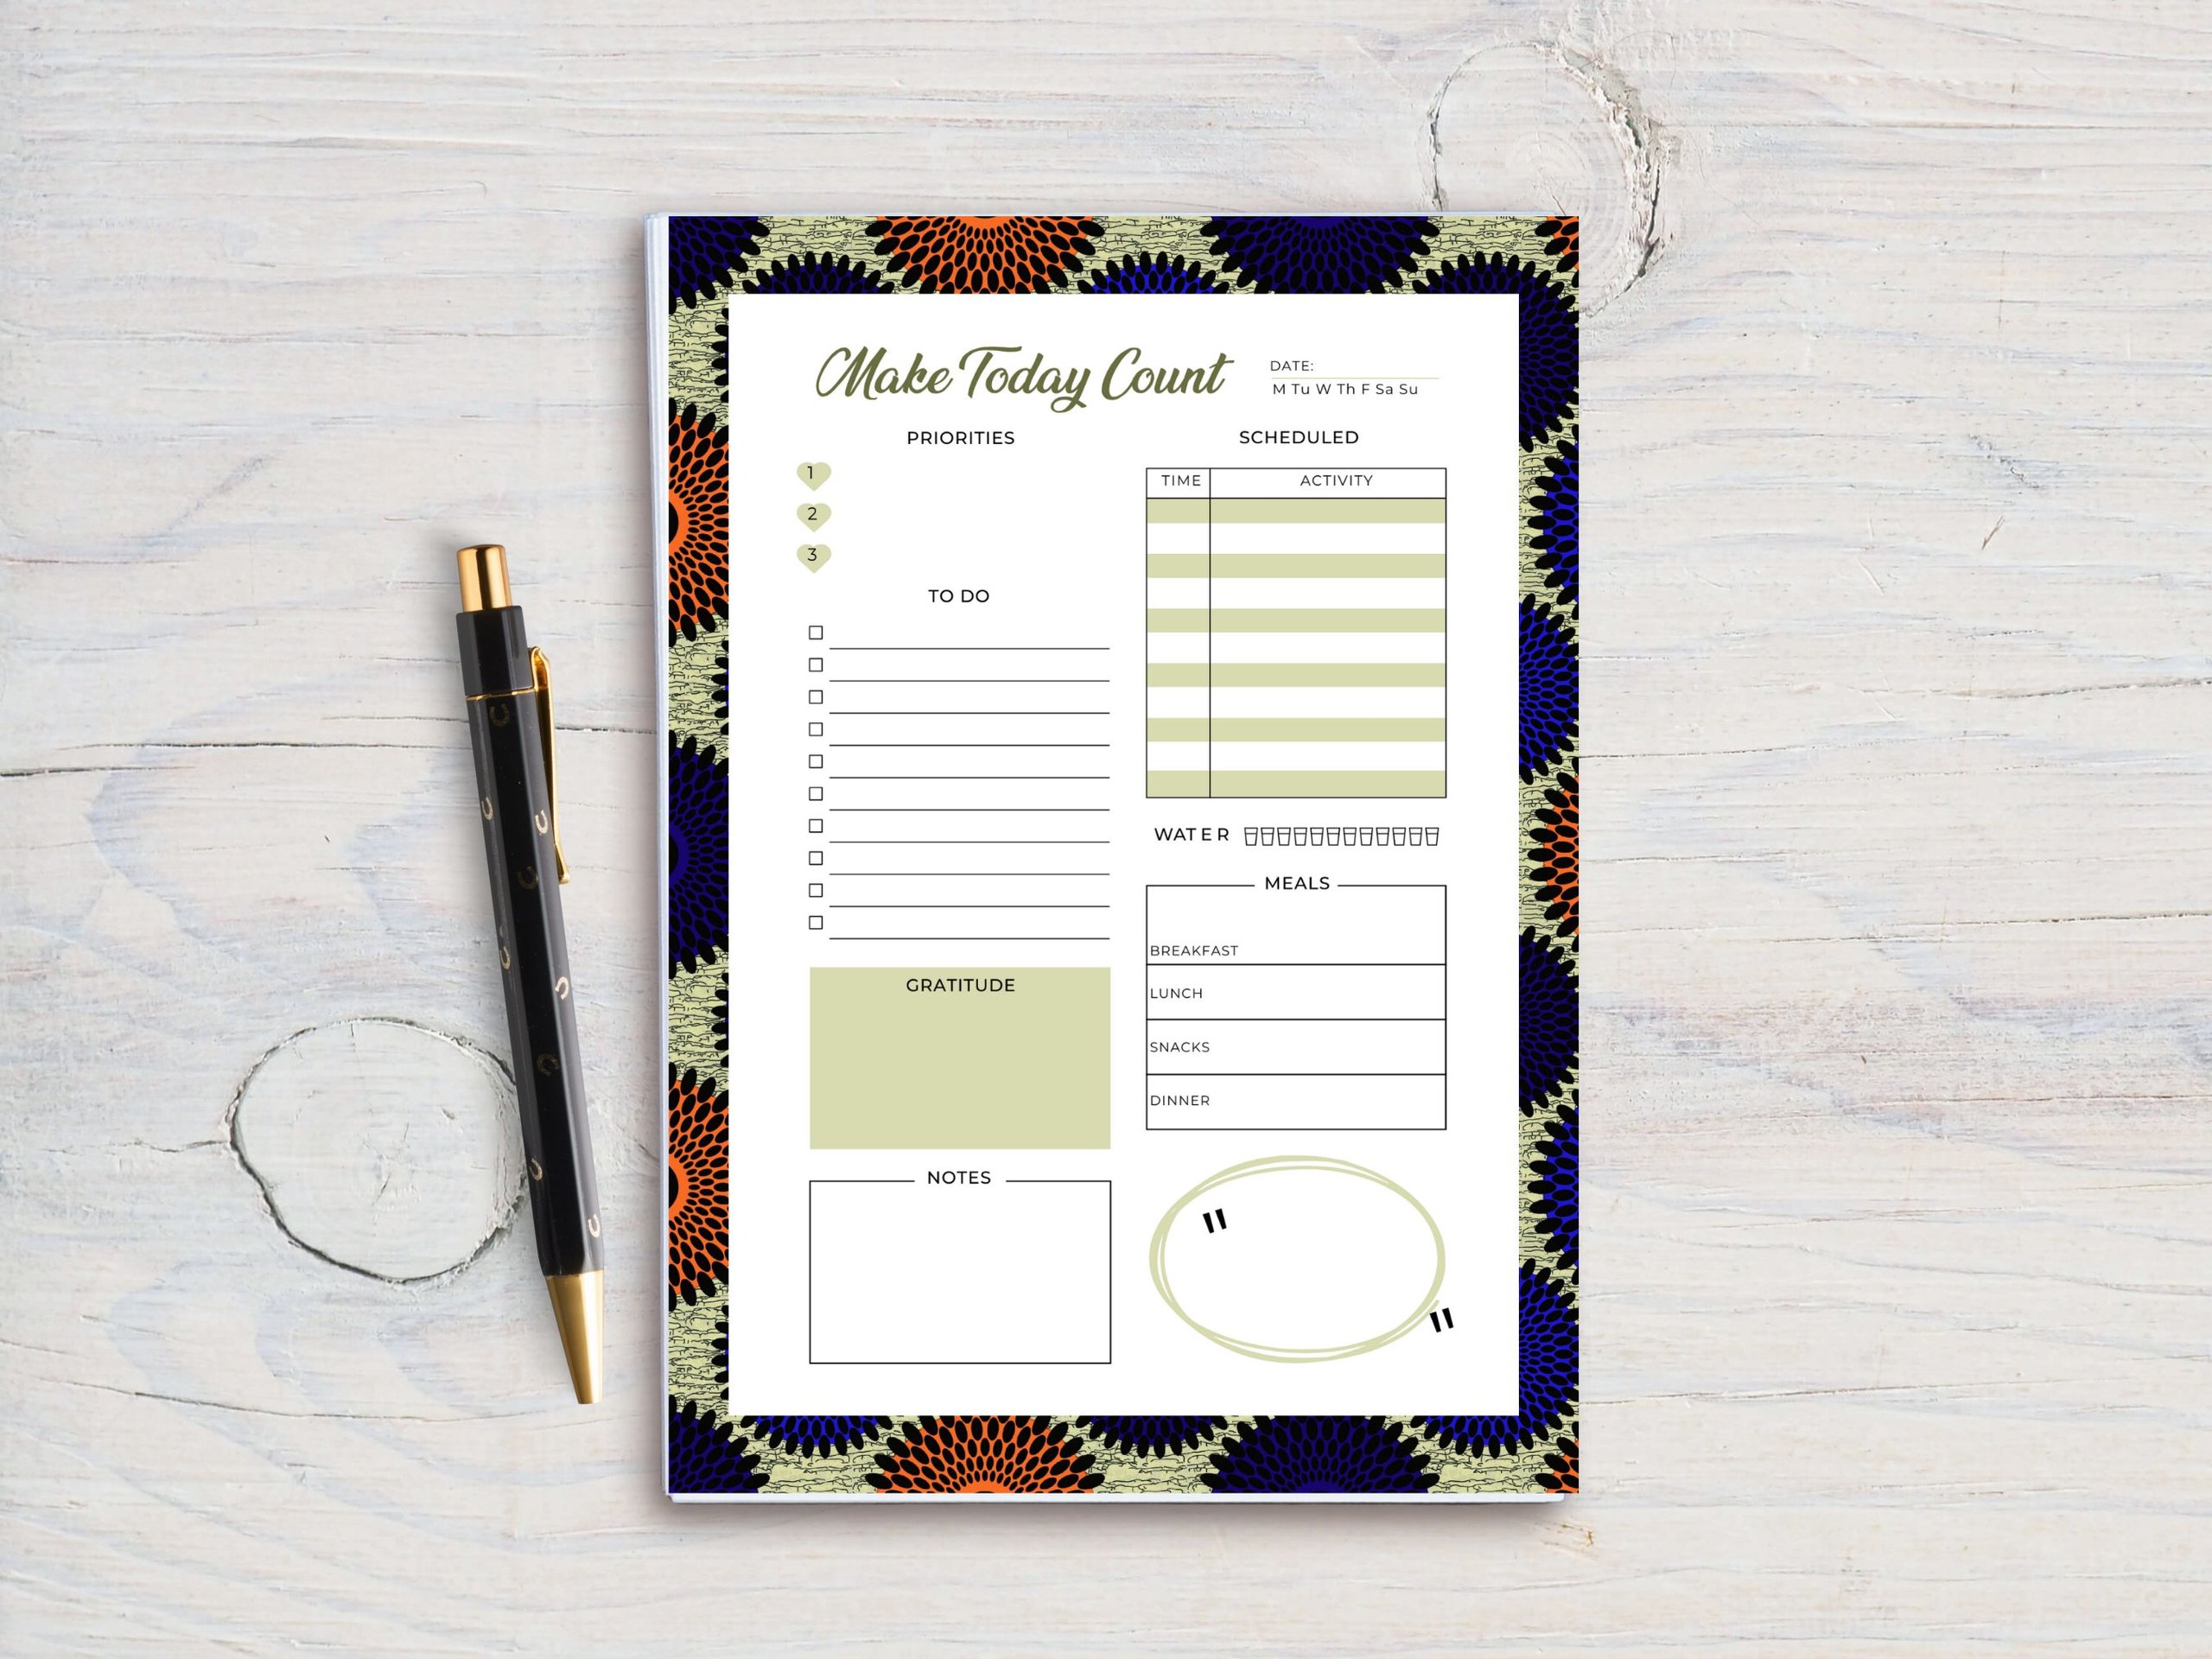 Blue Circle Afrocentric A5 Daily Planner